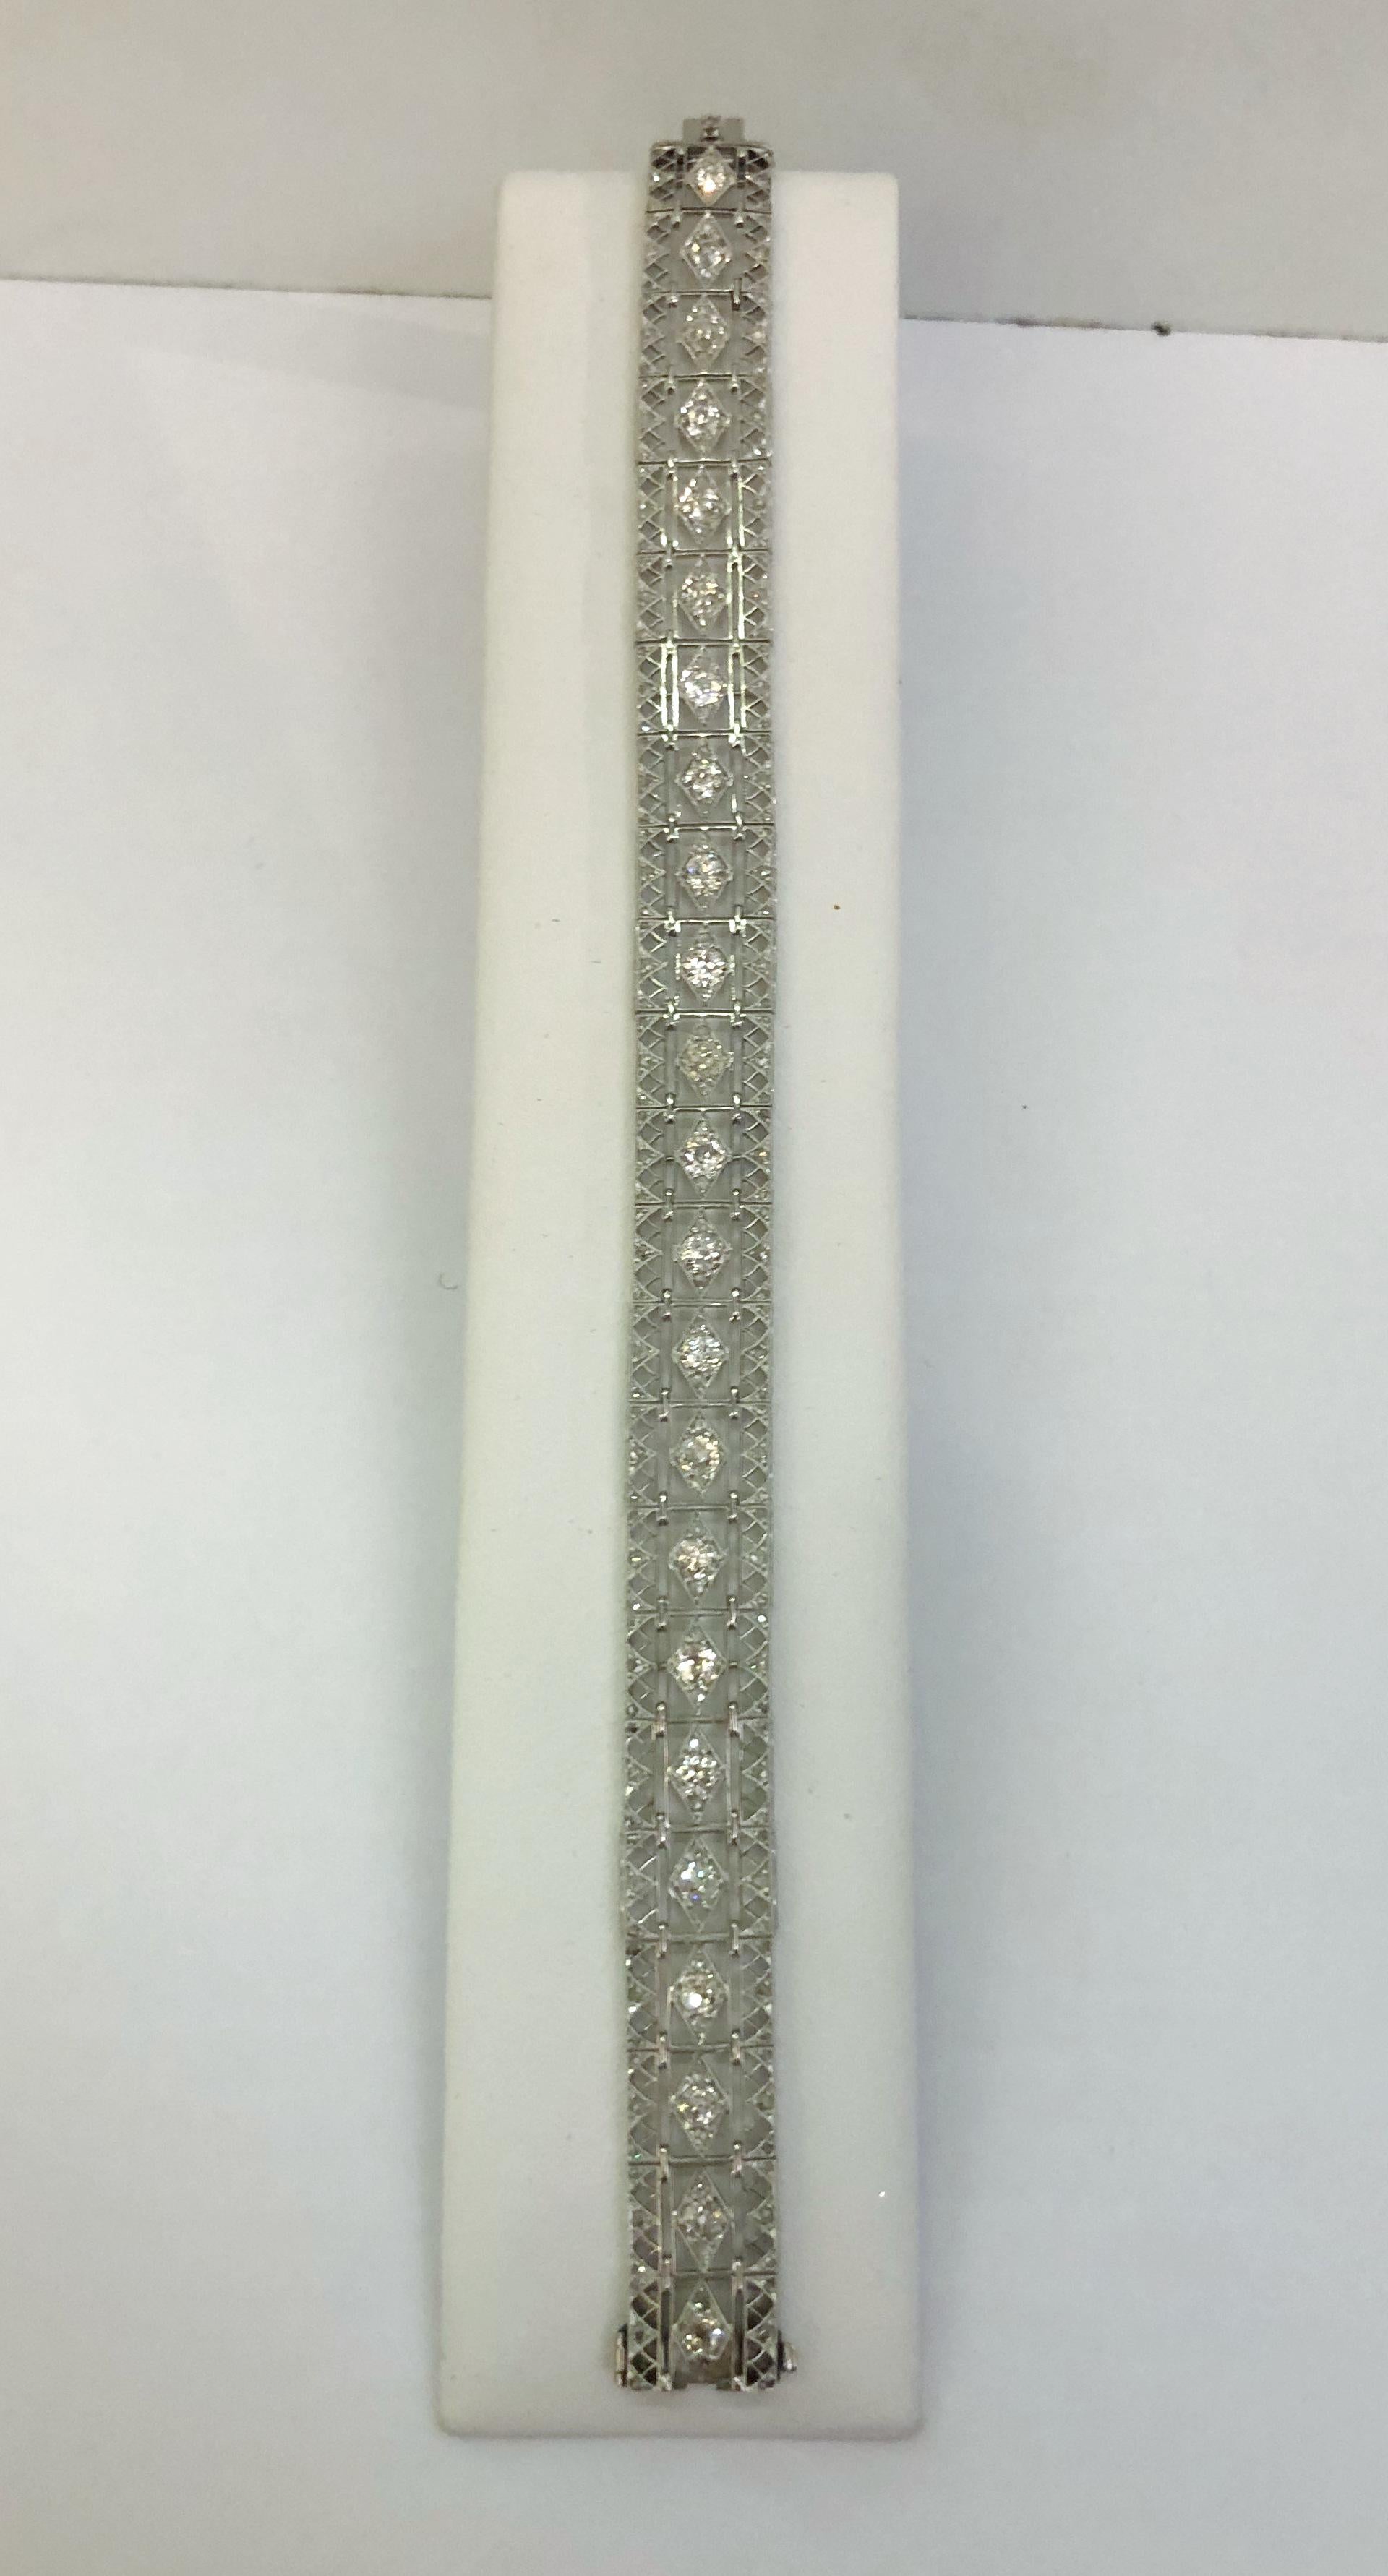 Vintage Italian platinum bracelet with chiseled fretwork and diamonds for a total of 4.00 carats / Made in Italy 1920s